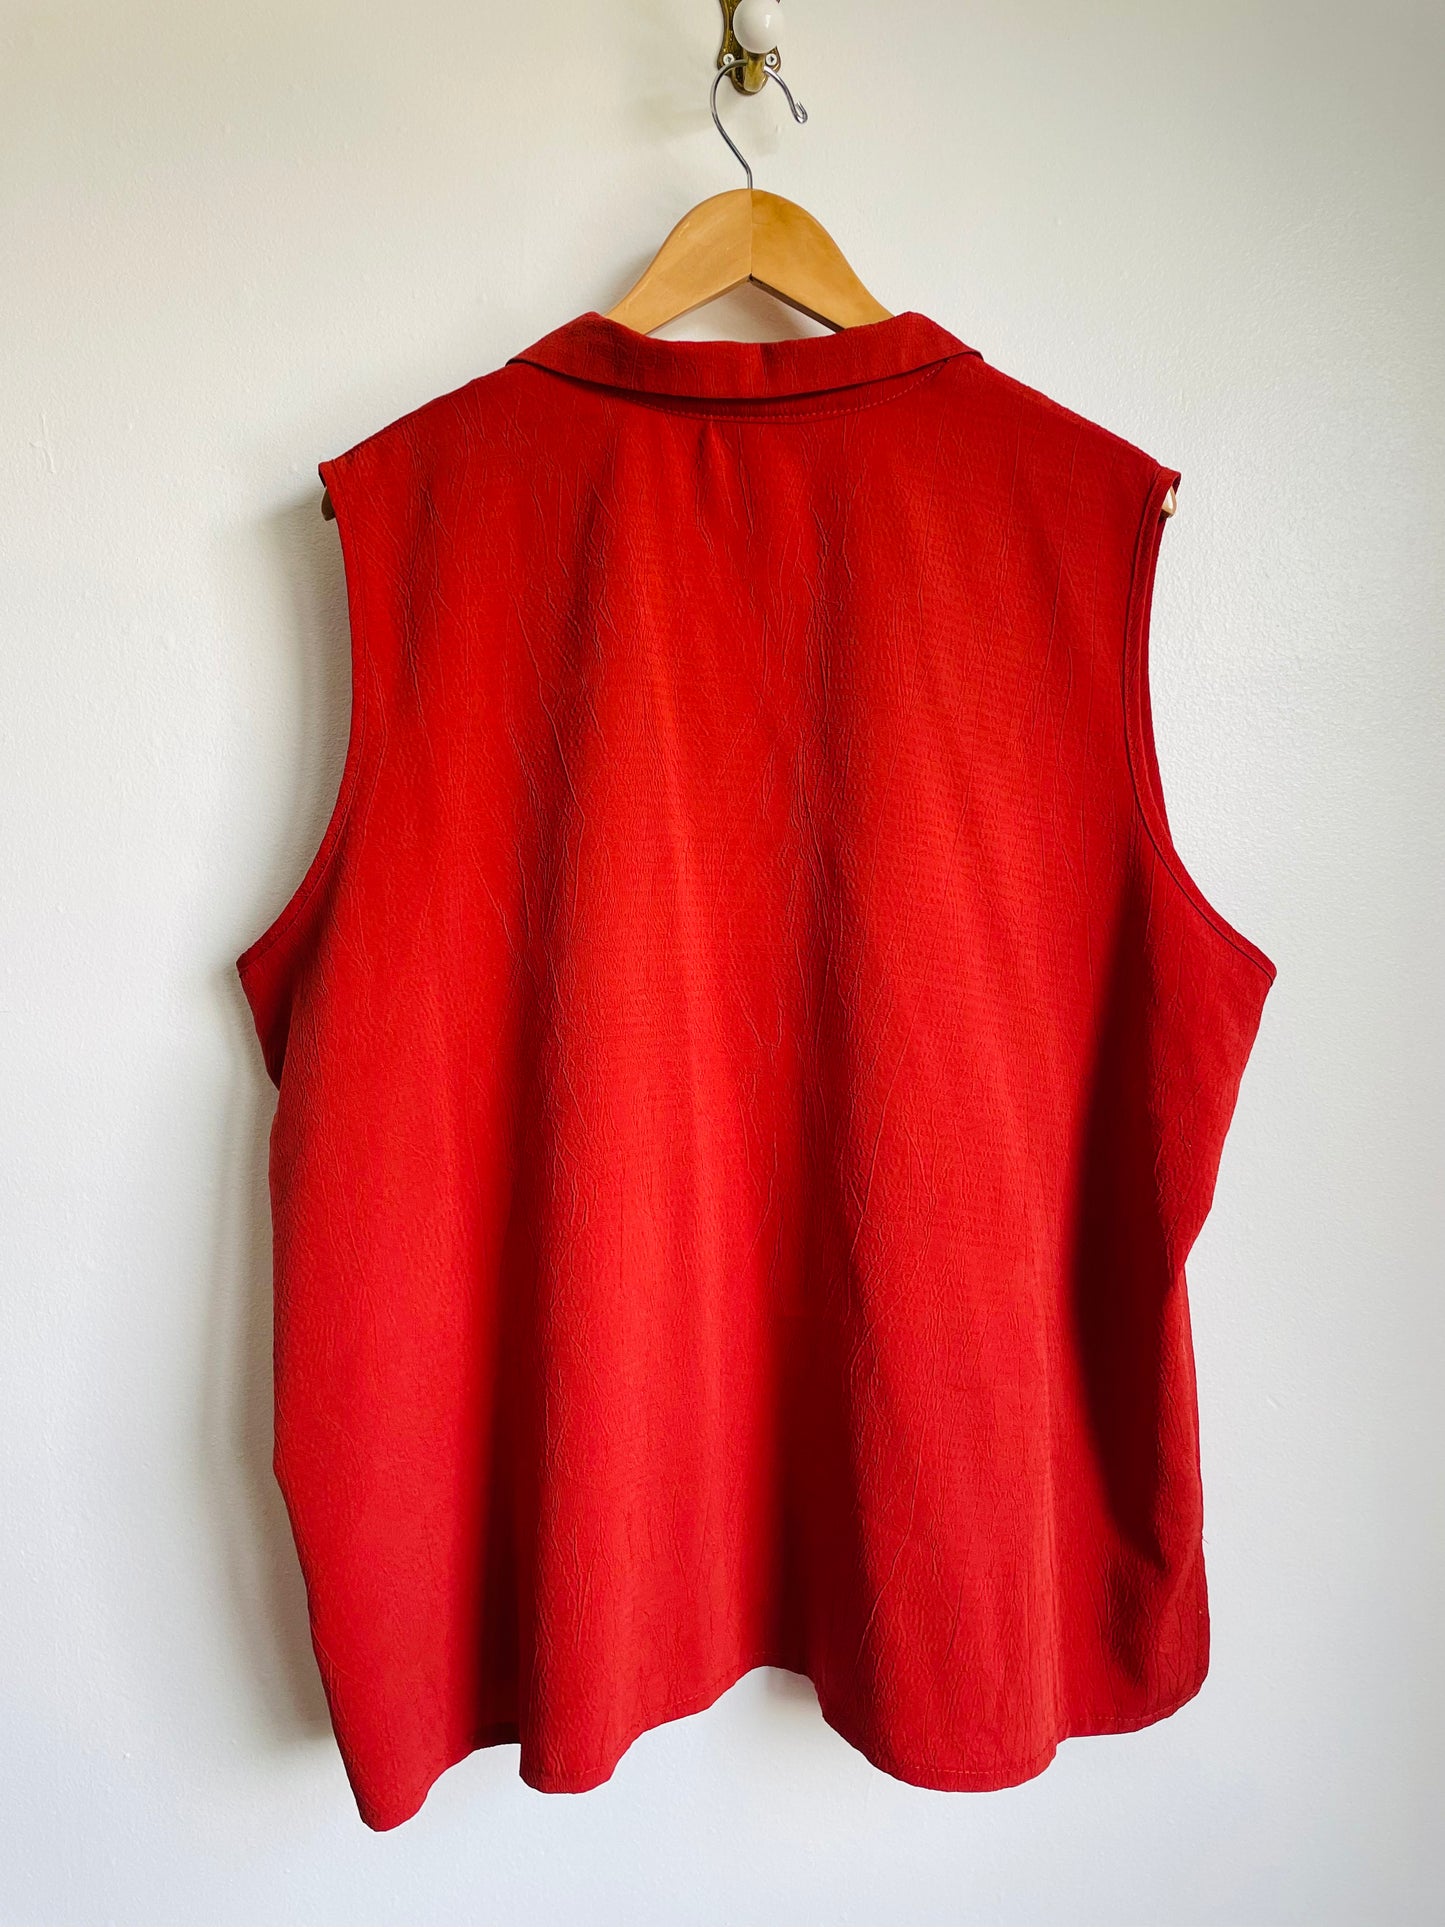 Vintage IMAGE Brand Rust Red Button Up Sleeveless Top with Dagger Collar - Size 3x